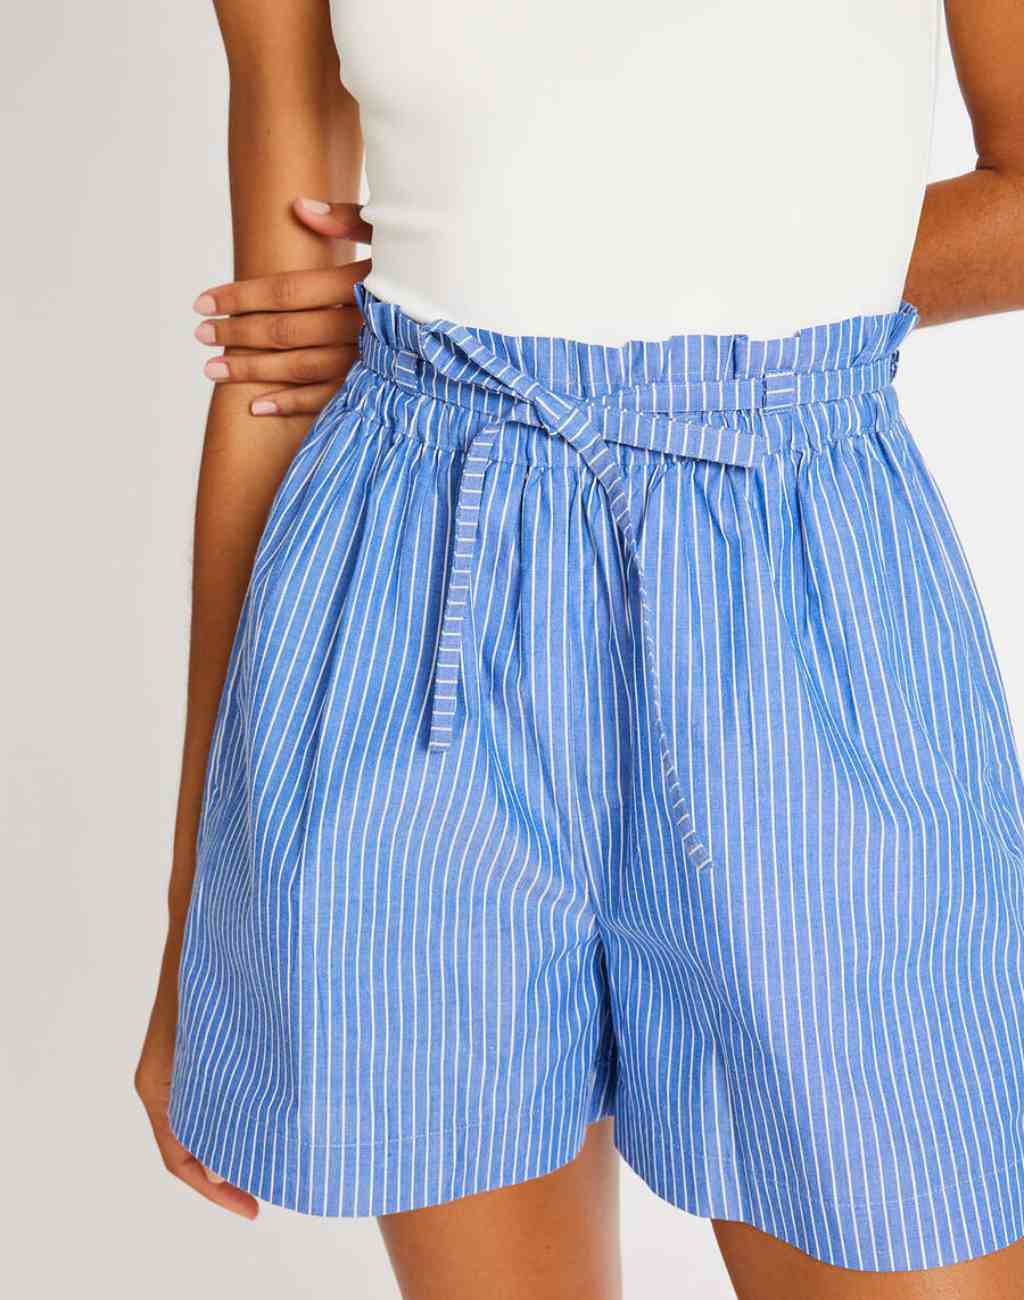 Cary Short in Blue and White Stripe | Elastic Waist with Drawstring and Side Pockets